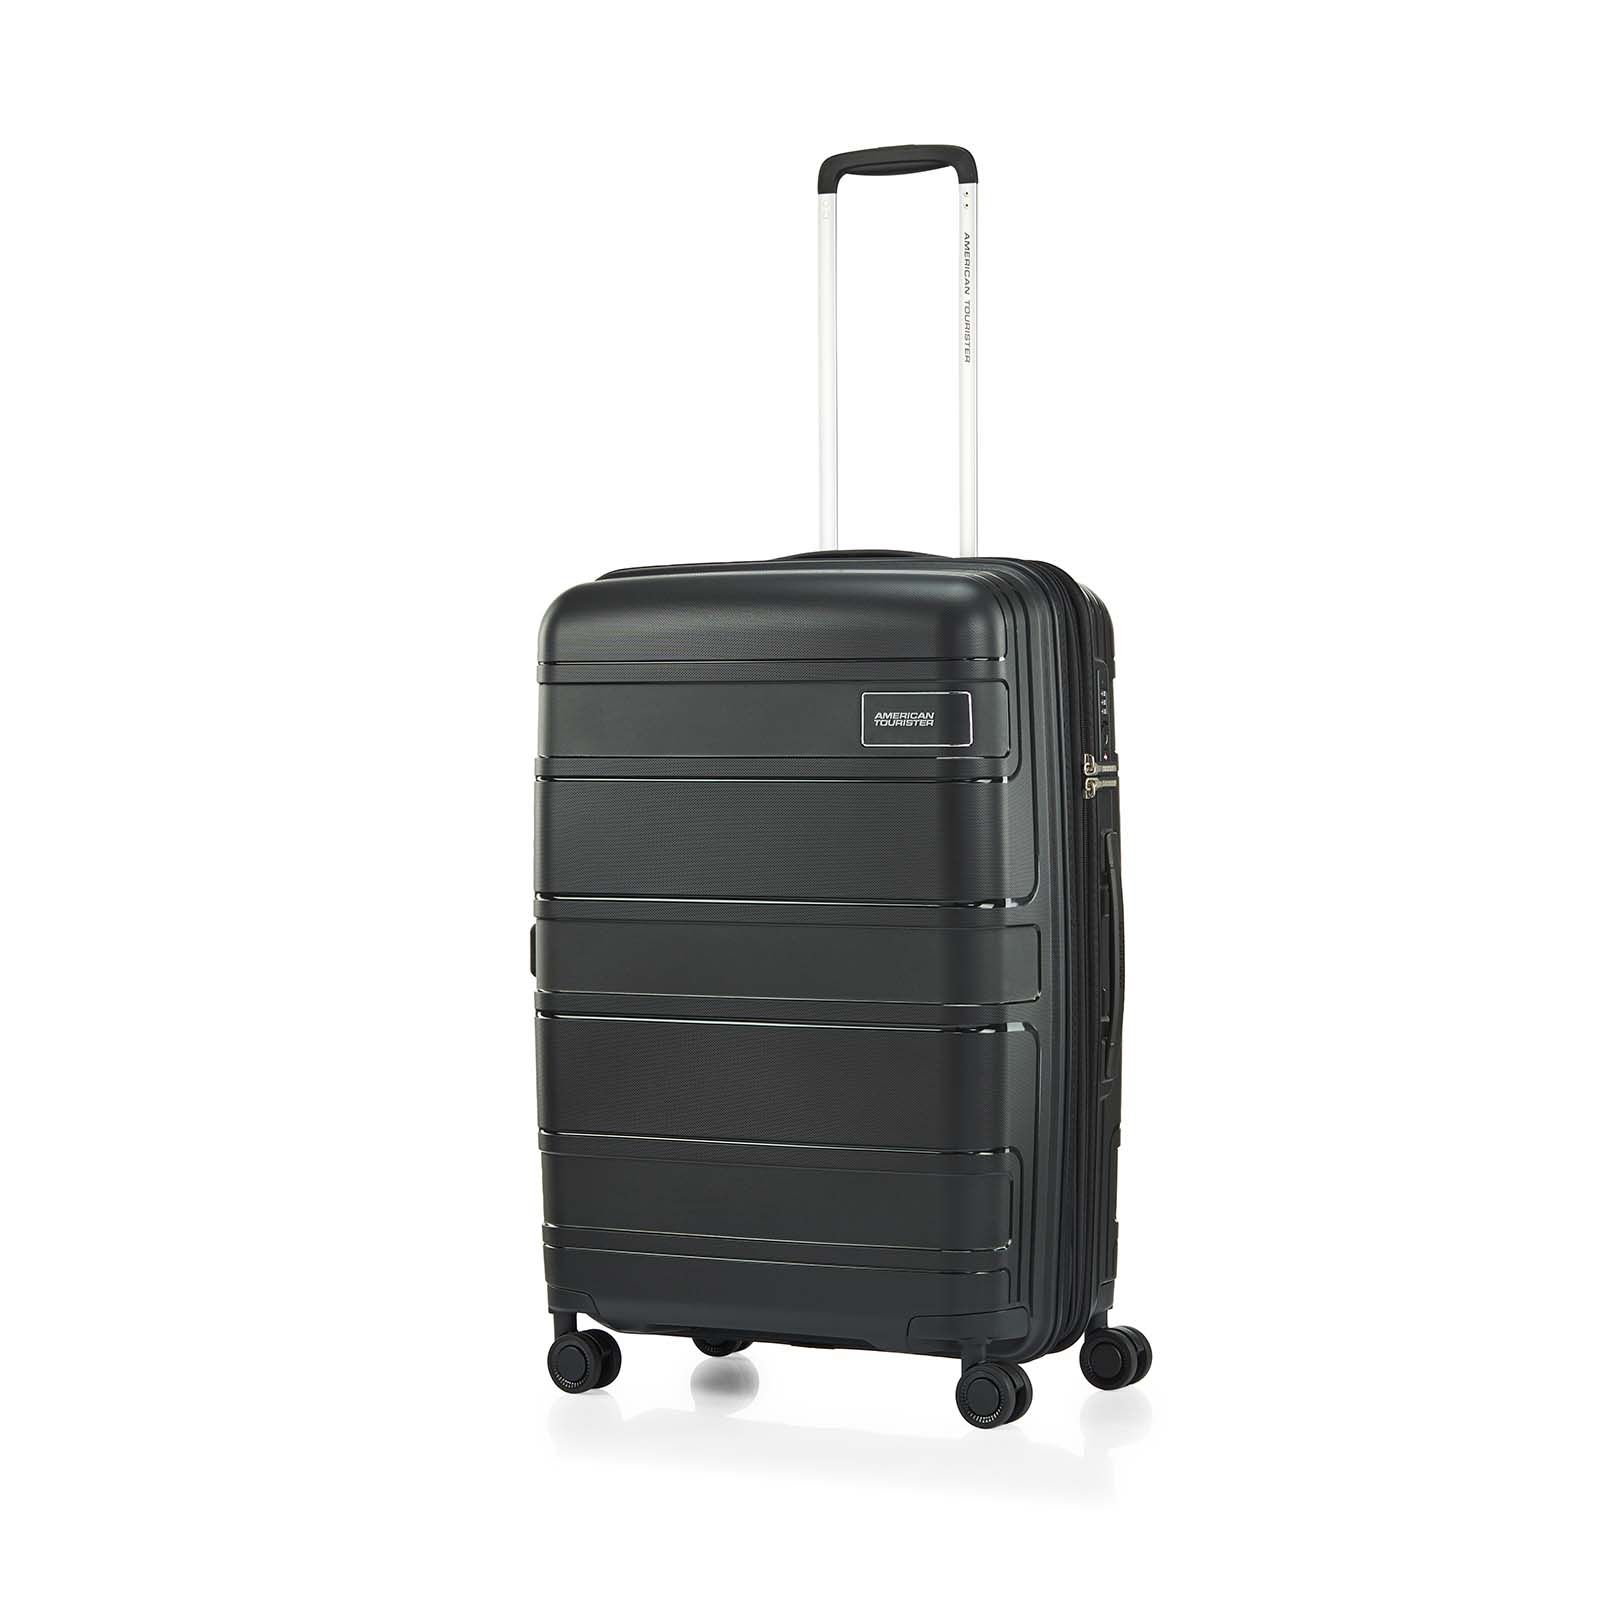 American-Tourister-Light-Max-69cm-Suitcase-Black-Front-Angle